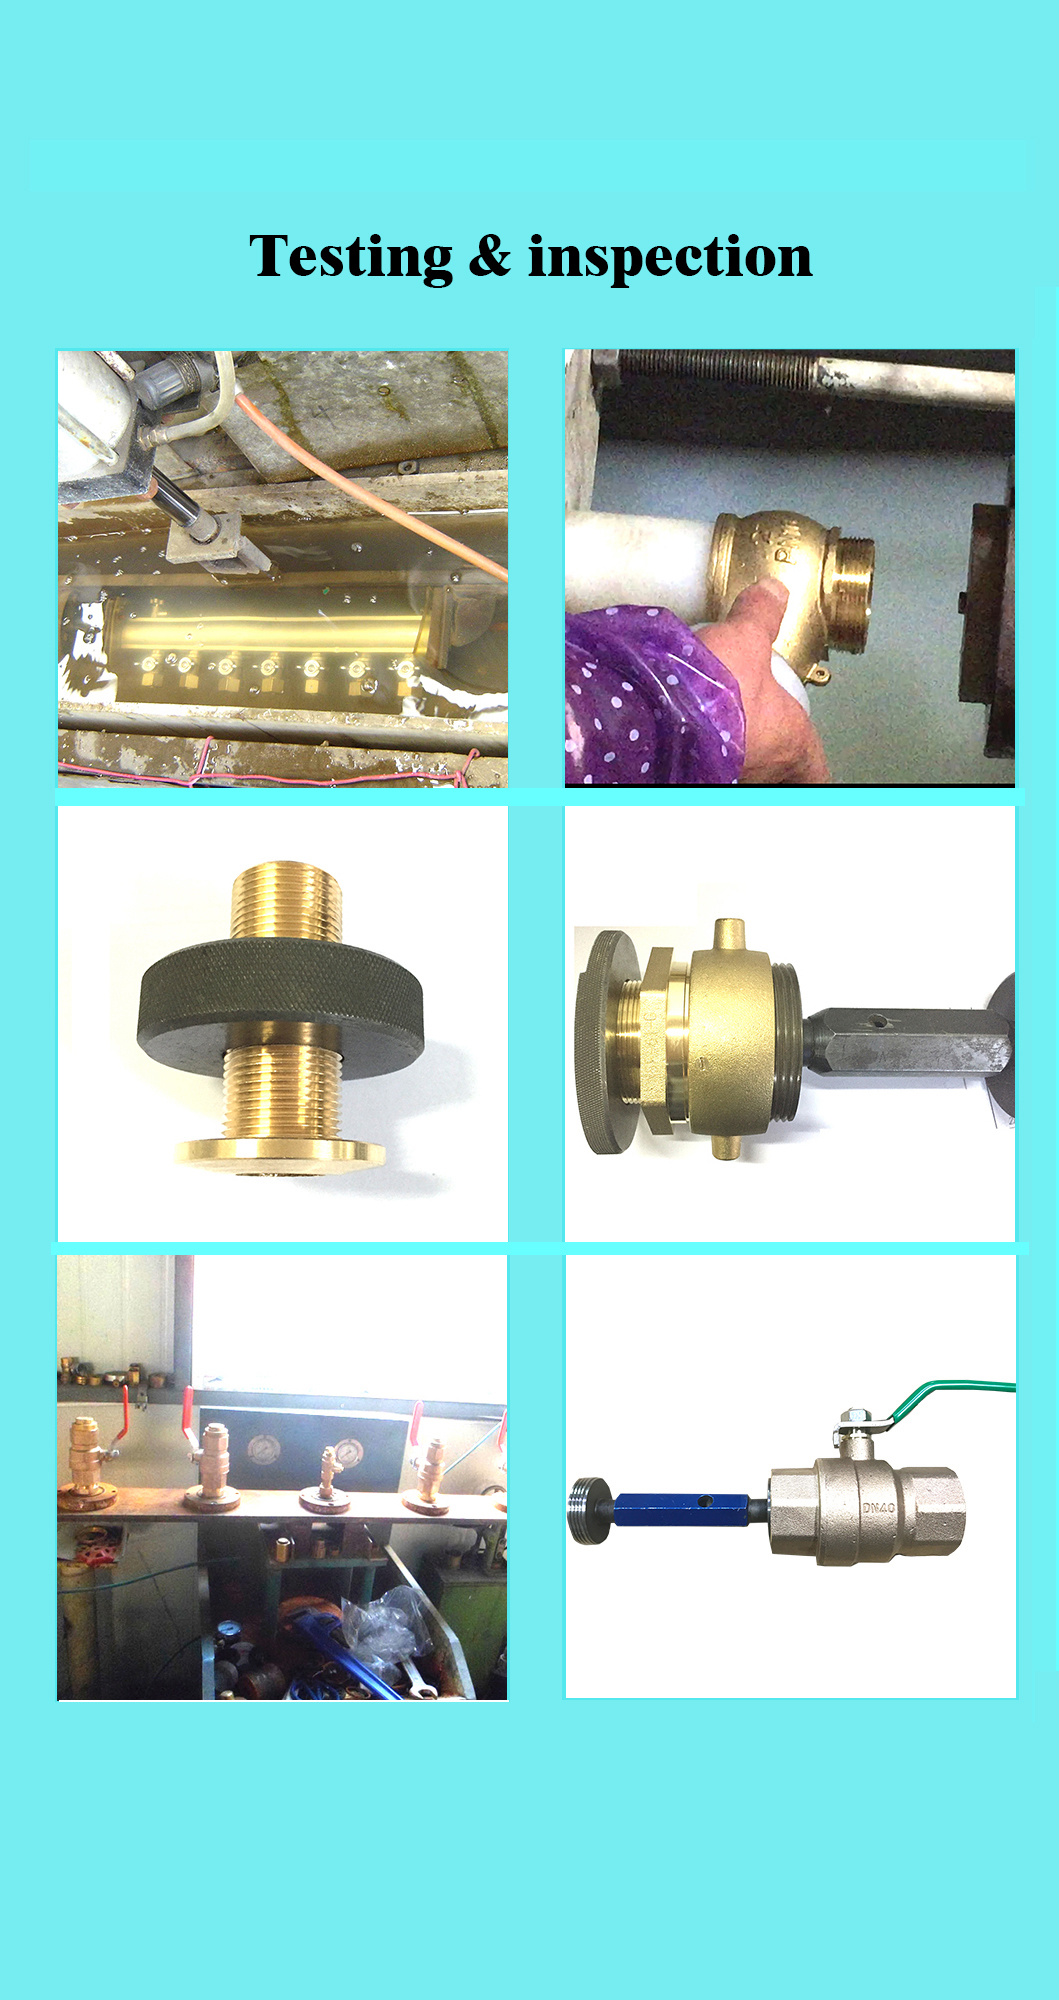 Brass Floating Ball Valve with Plastic Ball